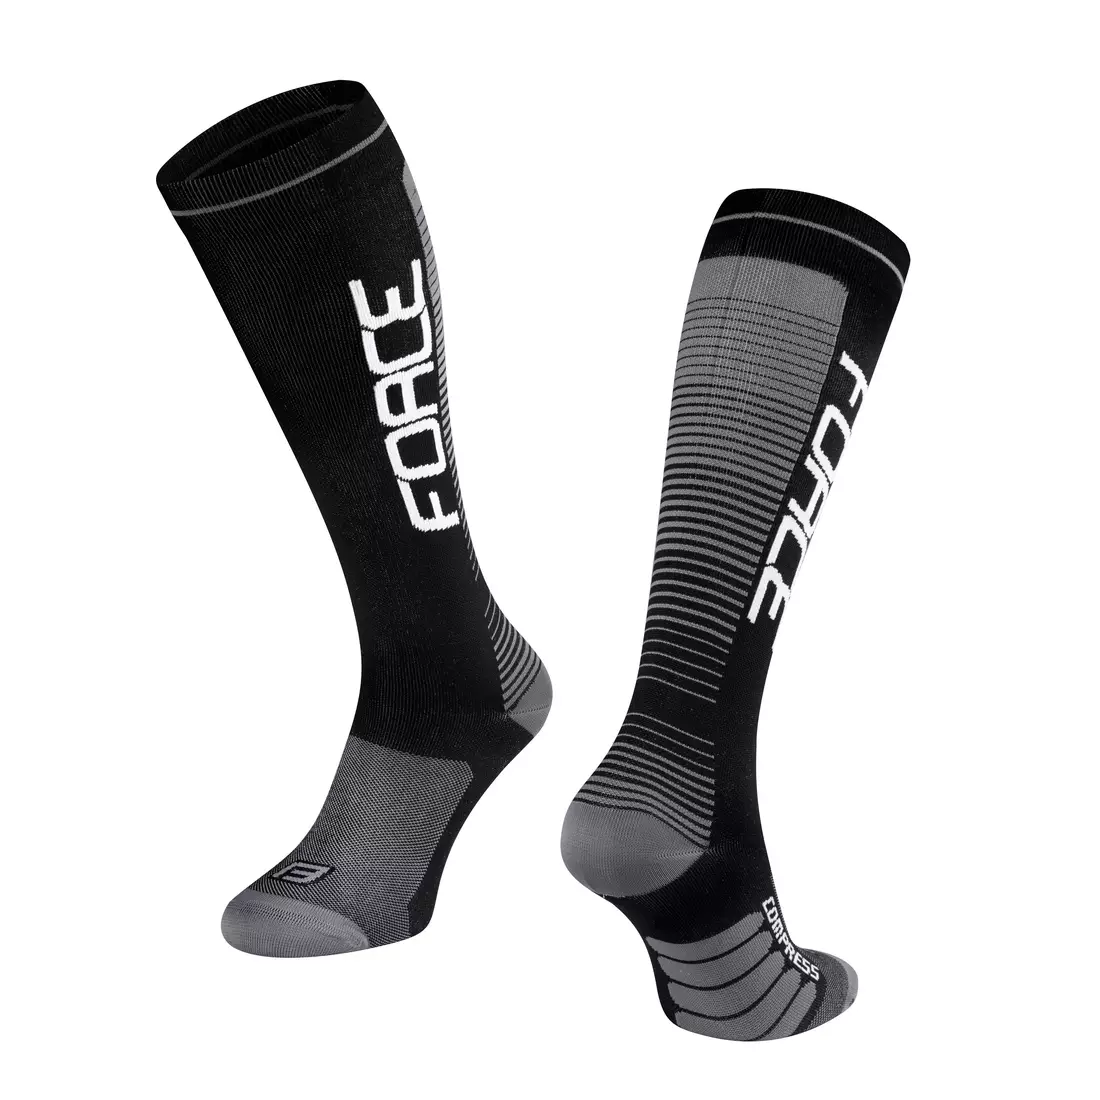 FORCE compression socks COMPRESS, black and gray 9011905